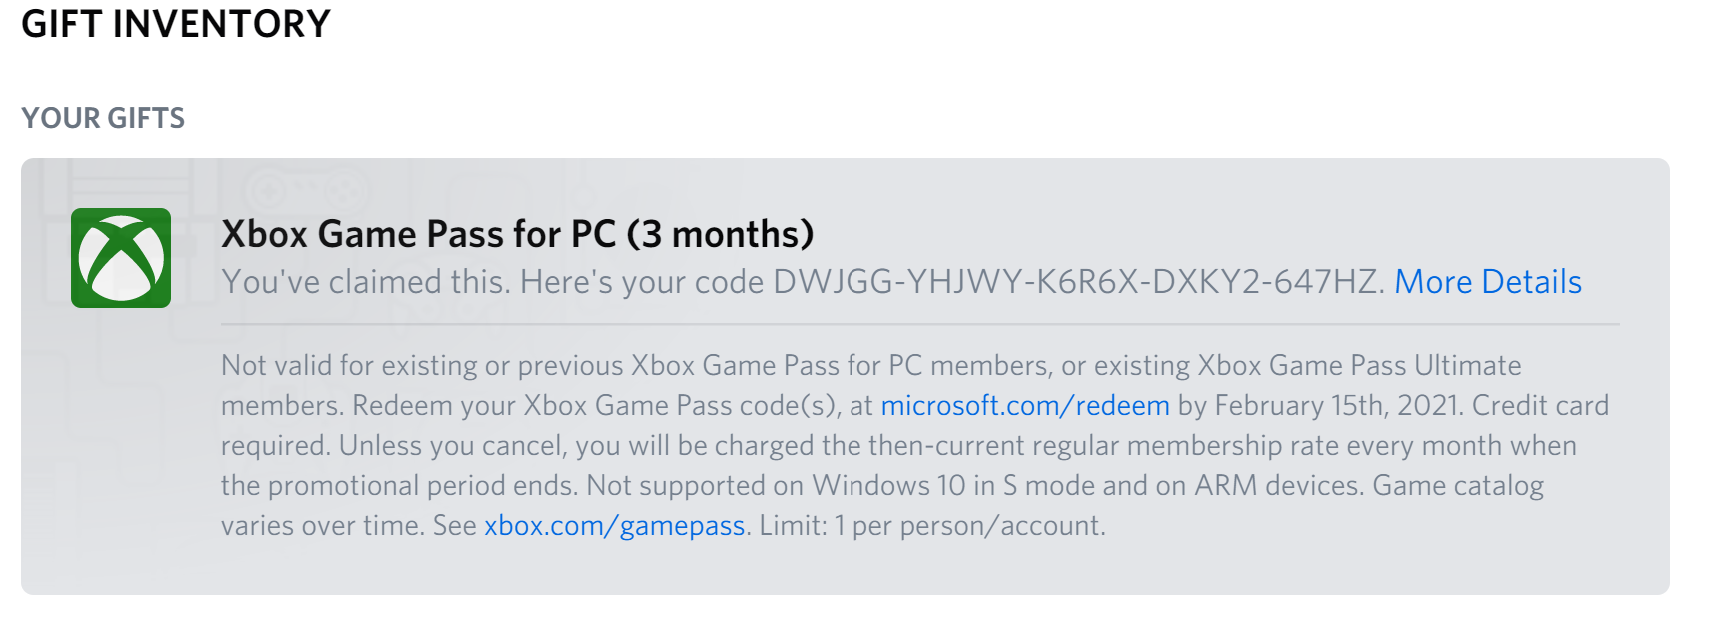 How do I activate my Xbox Game Pass?